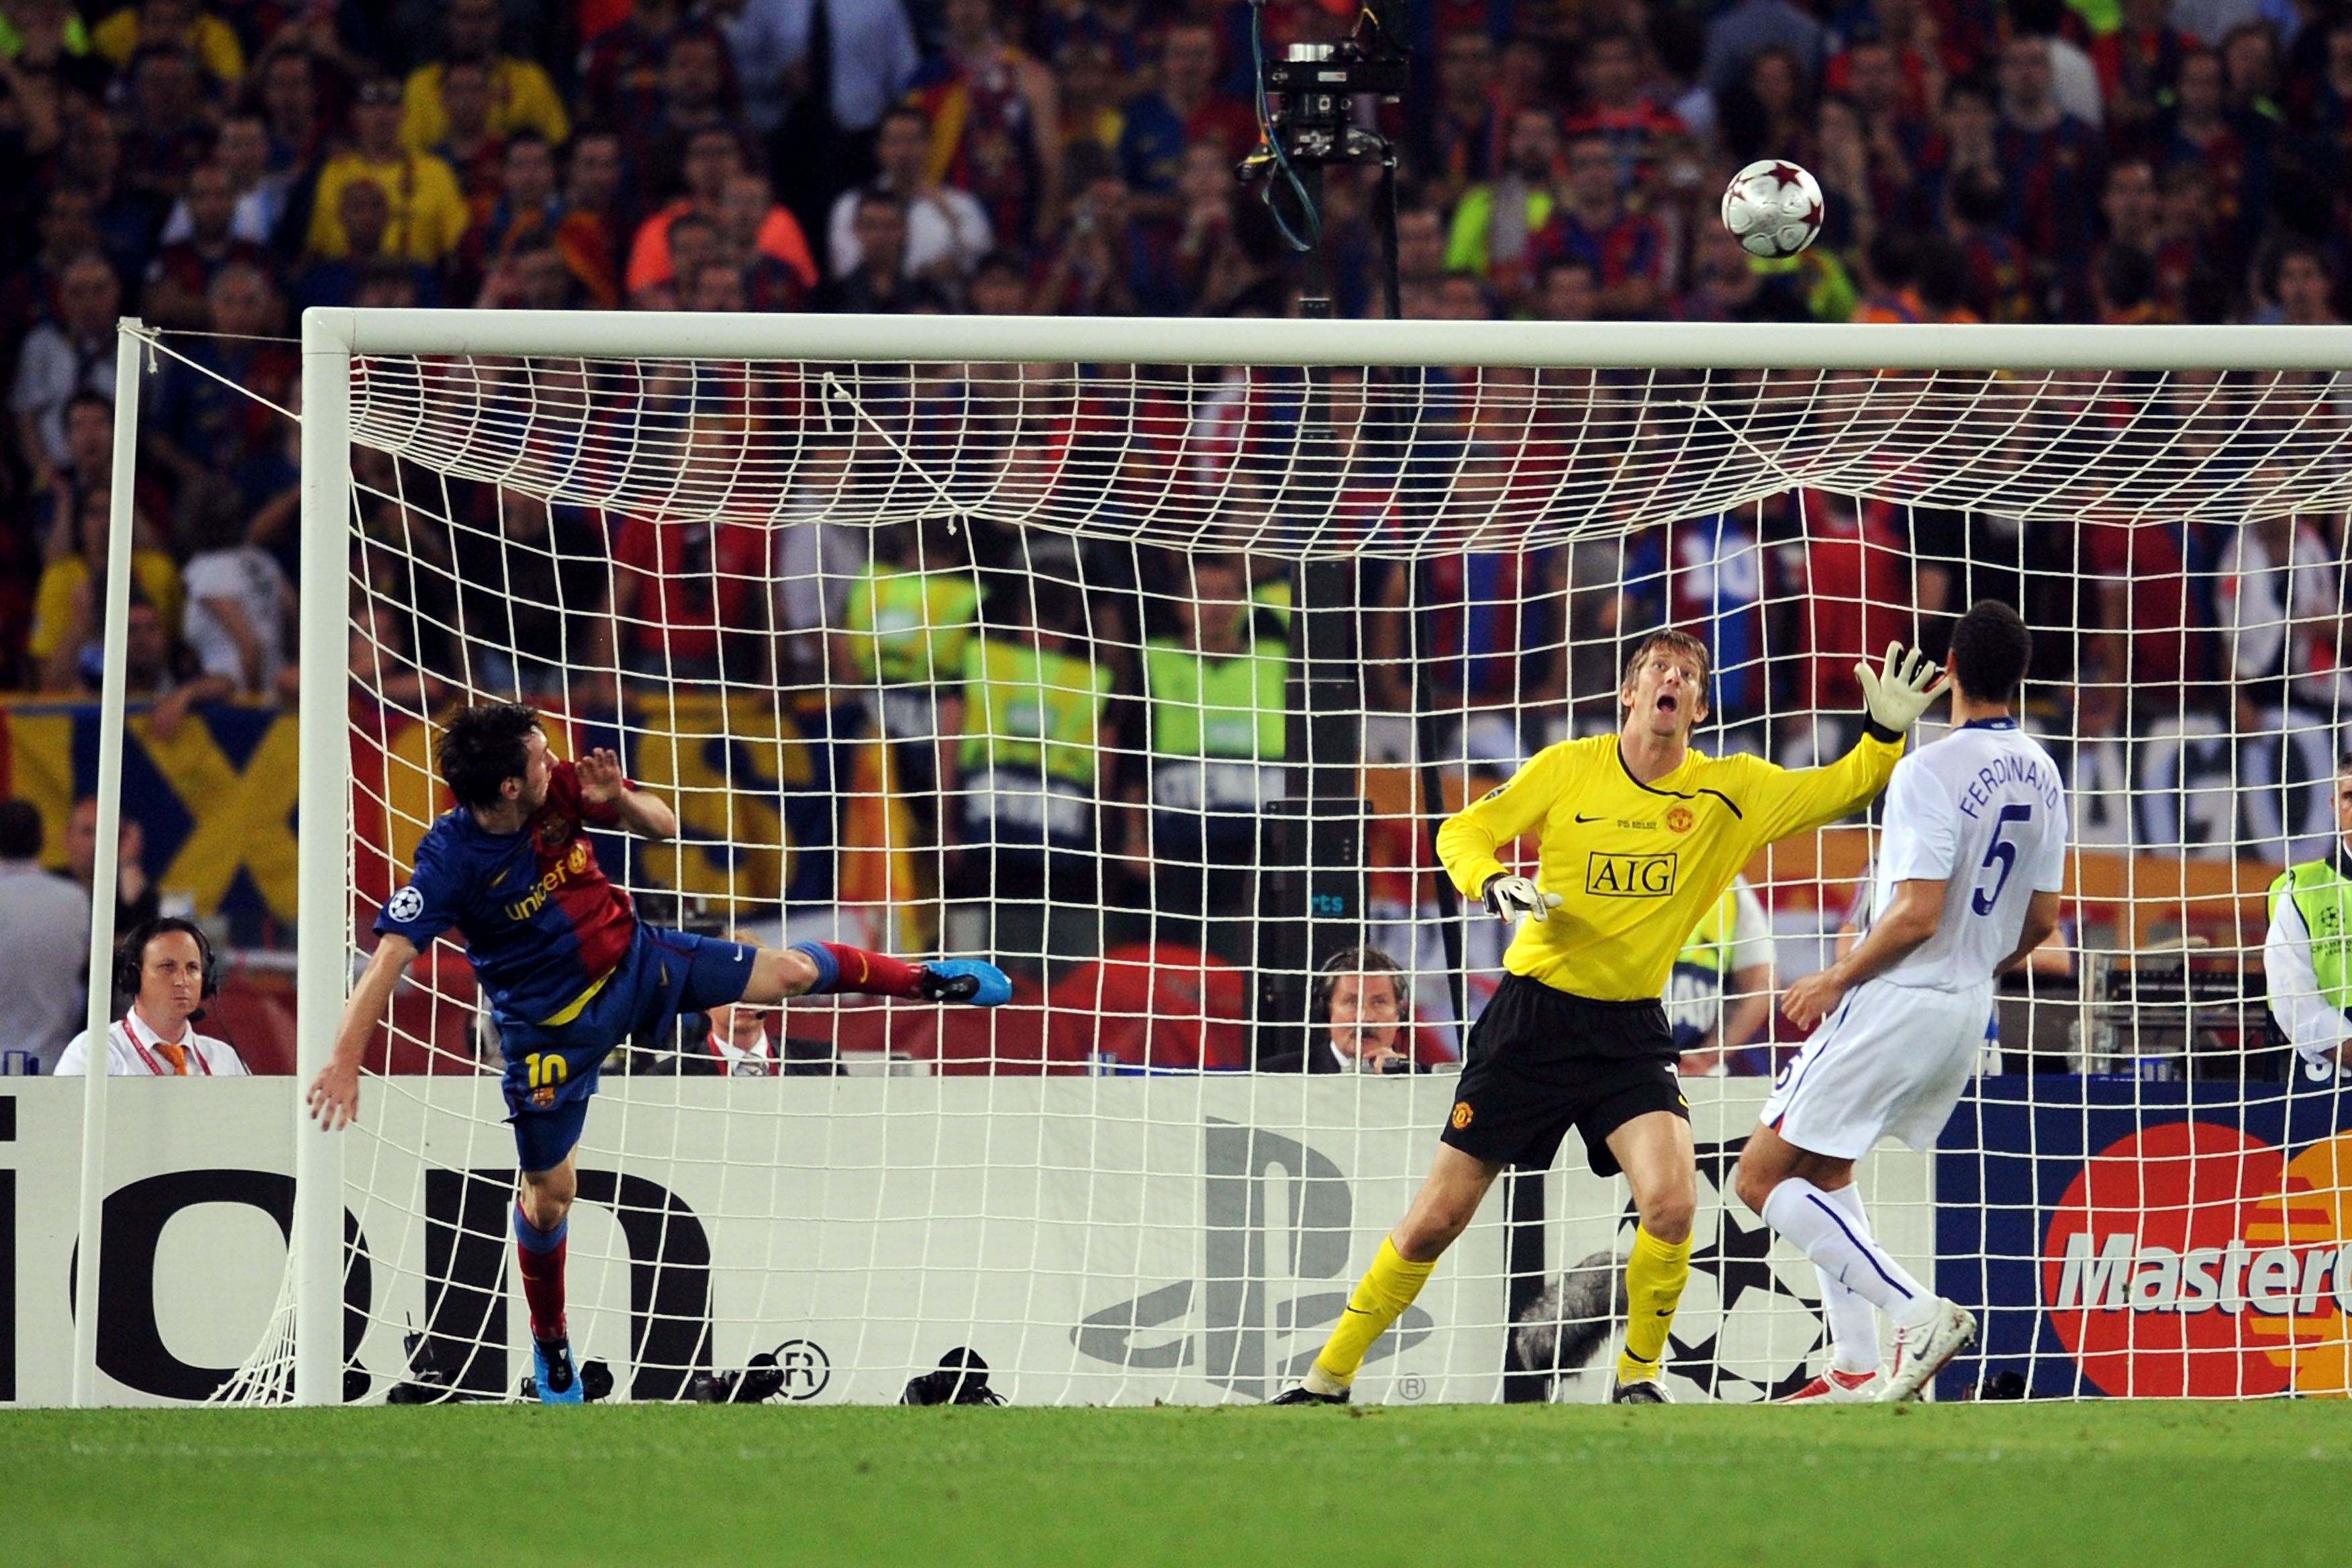 Messi scores in 2009 UCL final